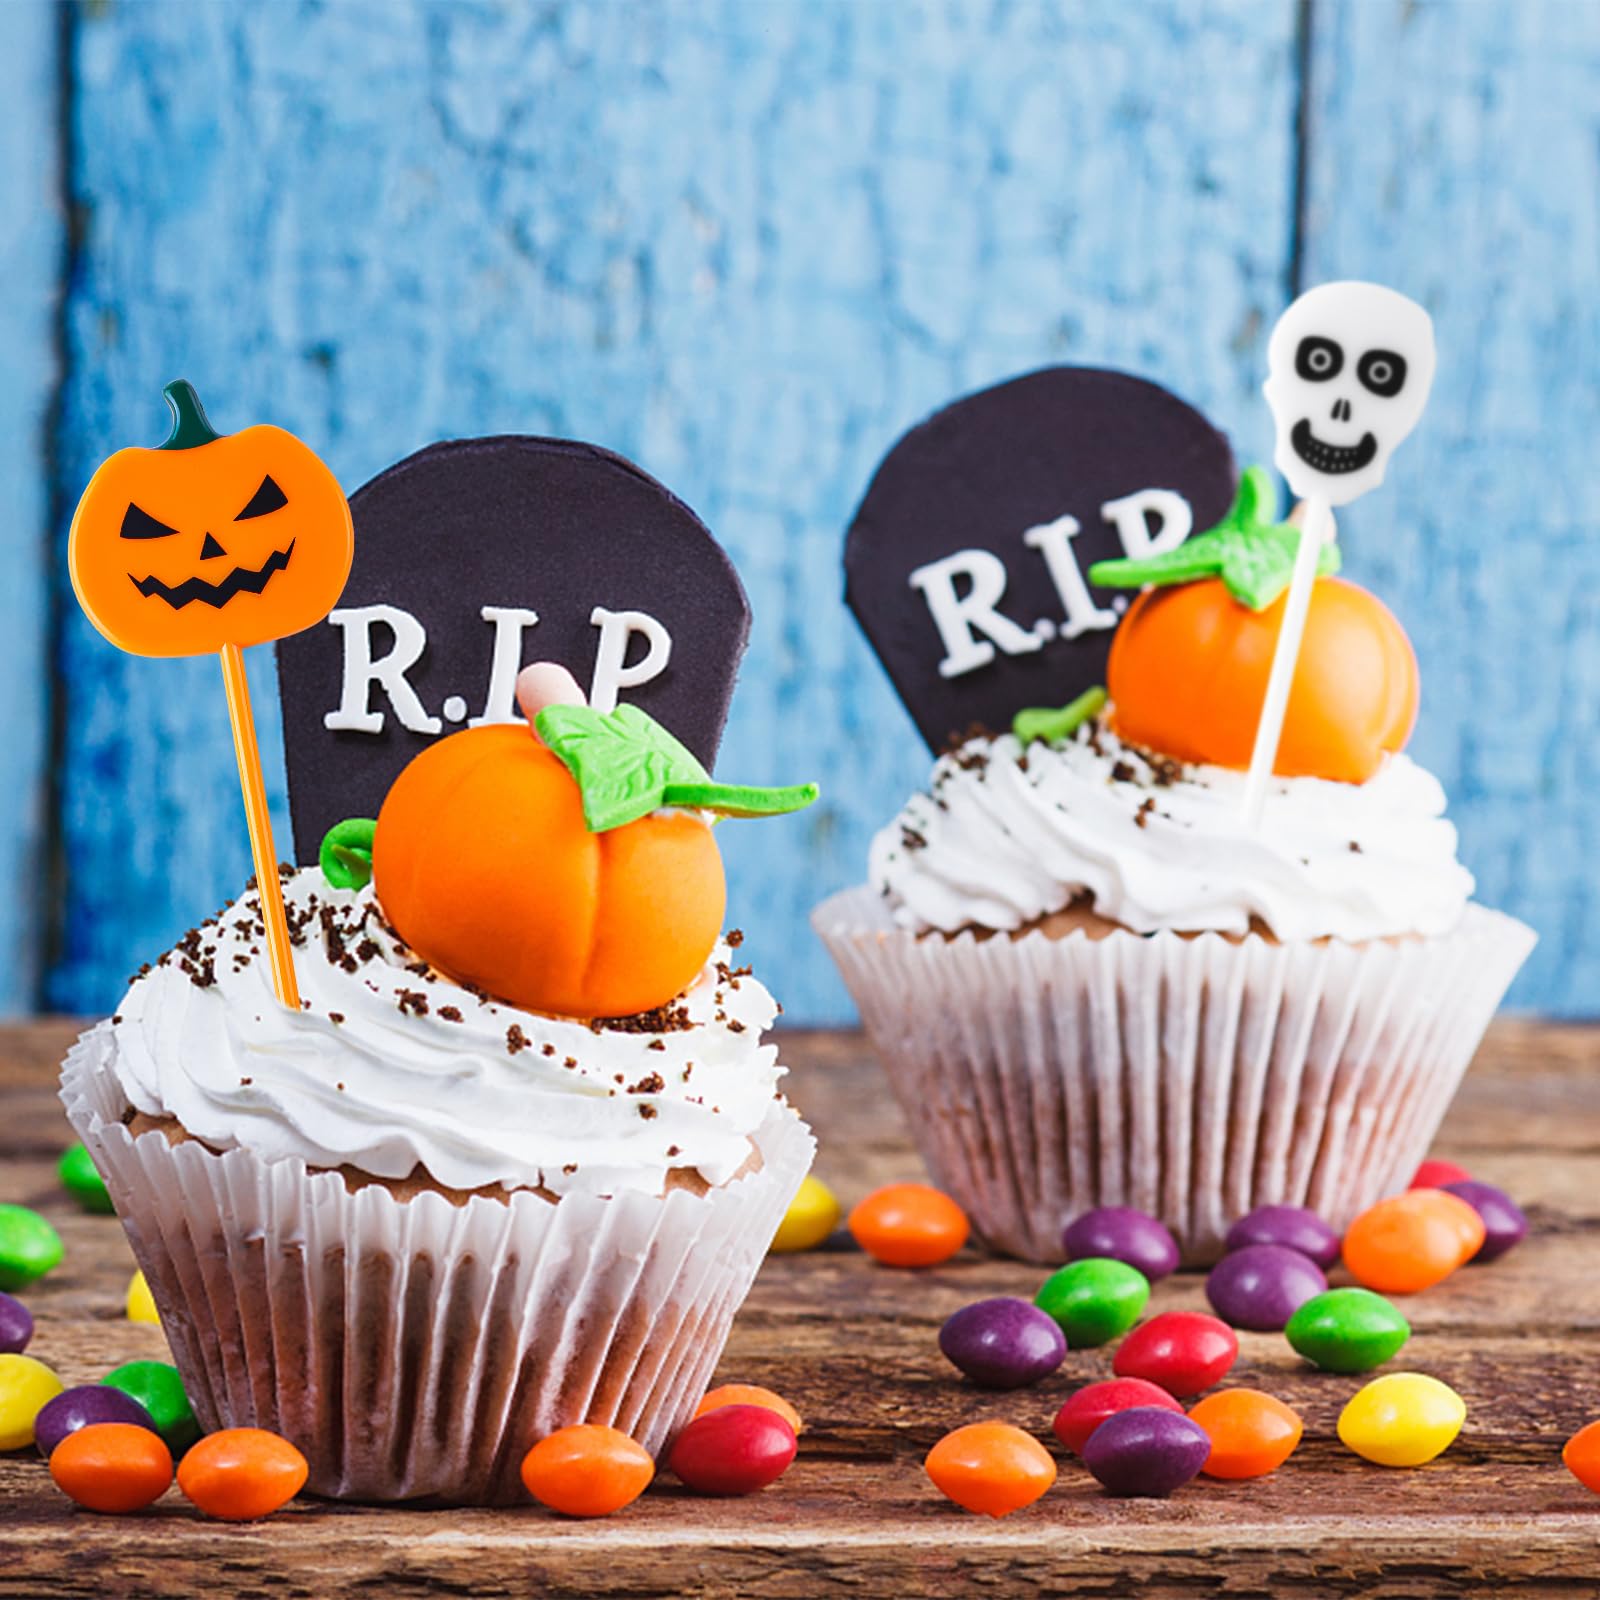 GlyinnHe 50PCS Halloween Picks Cupcake Toppers Plastic Halloween Toothpicks Halloween Cupcake Food Cocktail Appetizer Picks for Halloween Baby Shower Birthday Wedding Party Supply